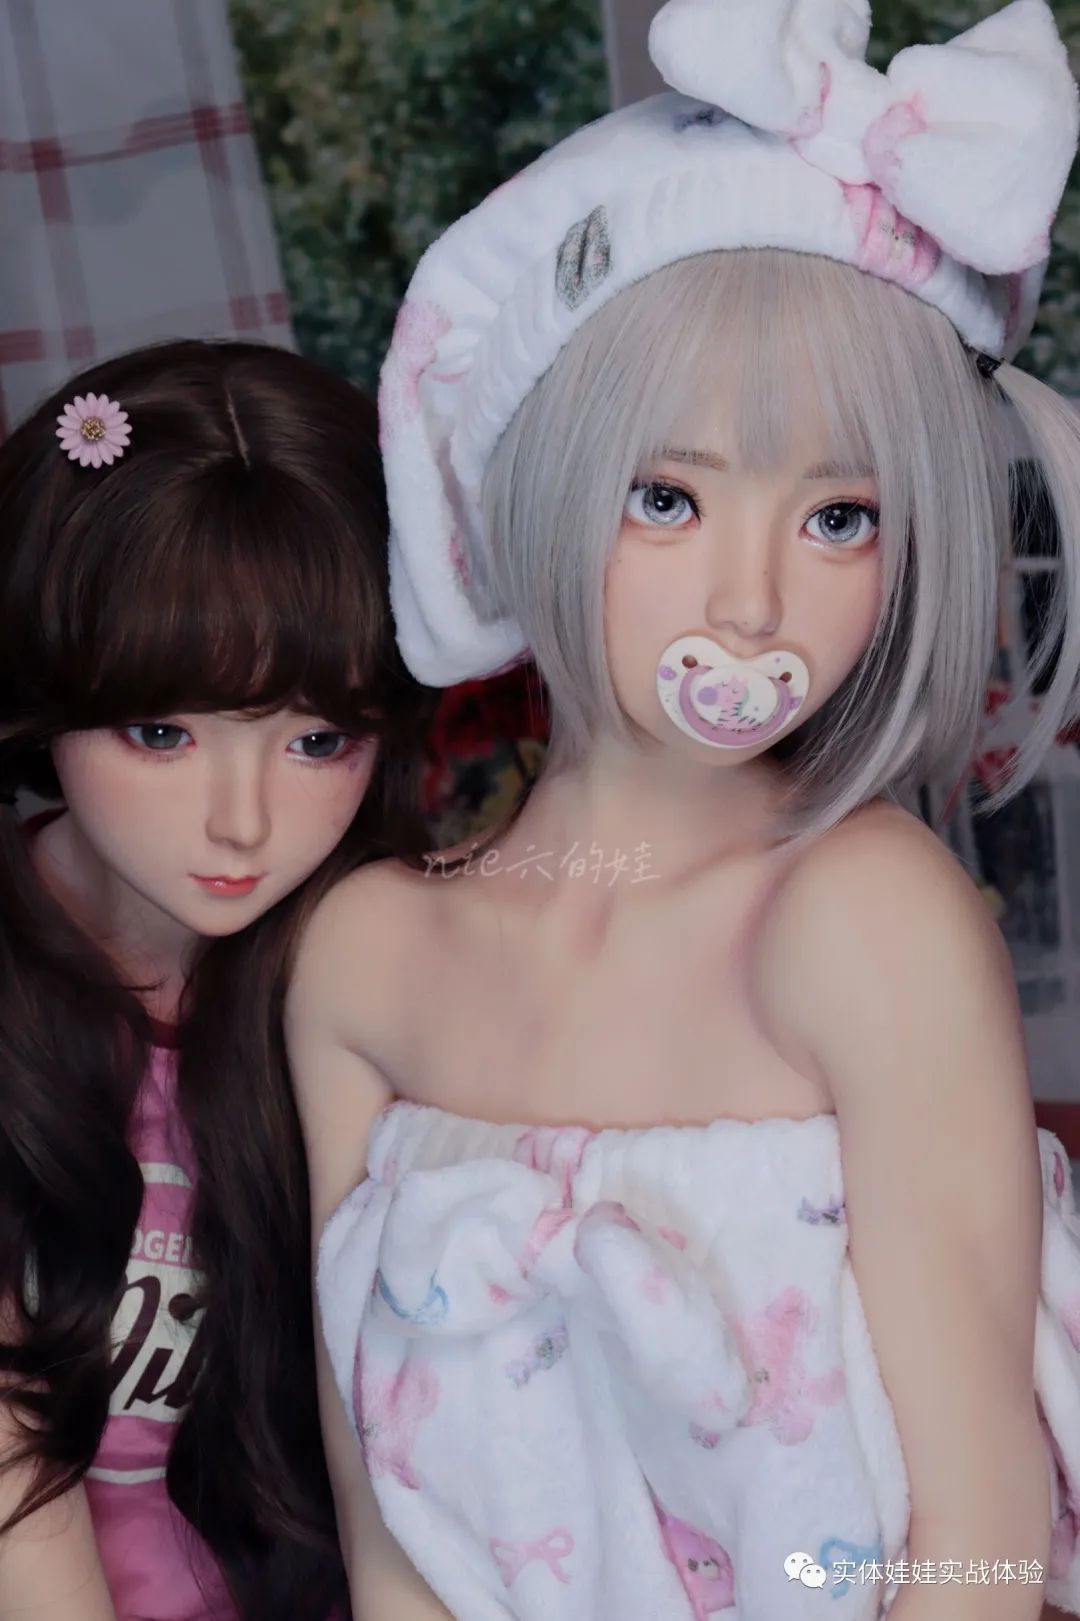 One of the questions and answers about the simulation entity doll products